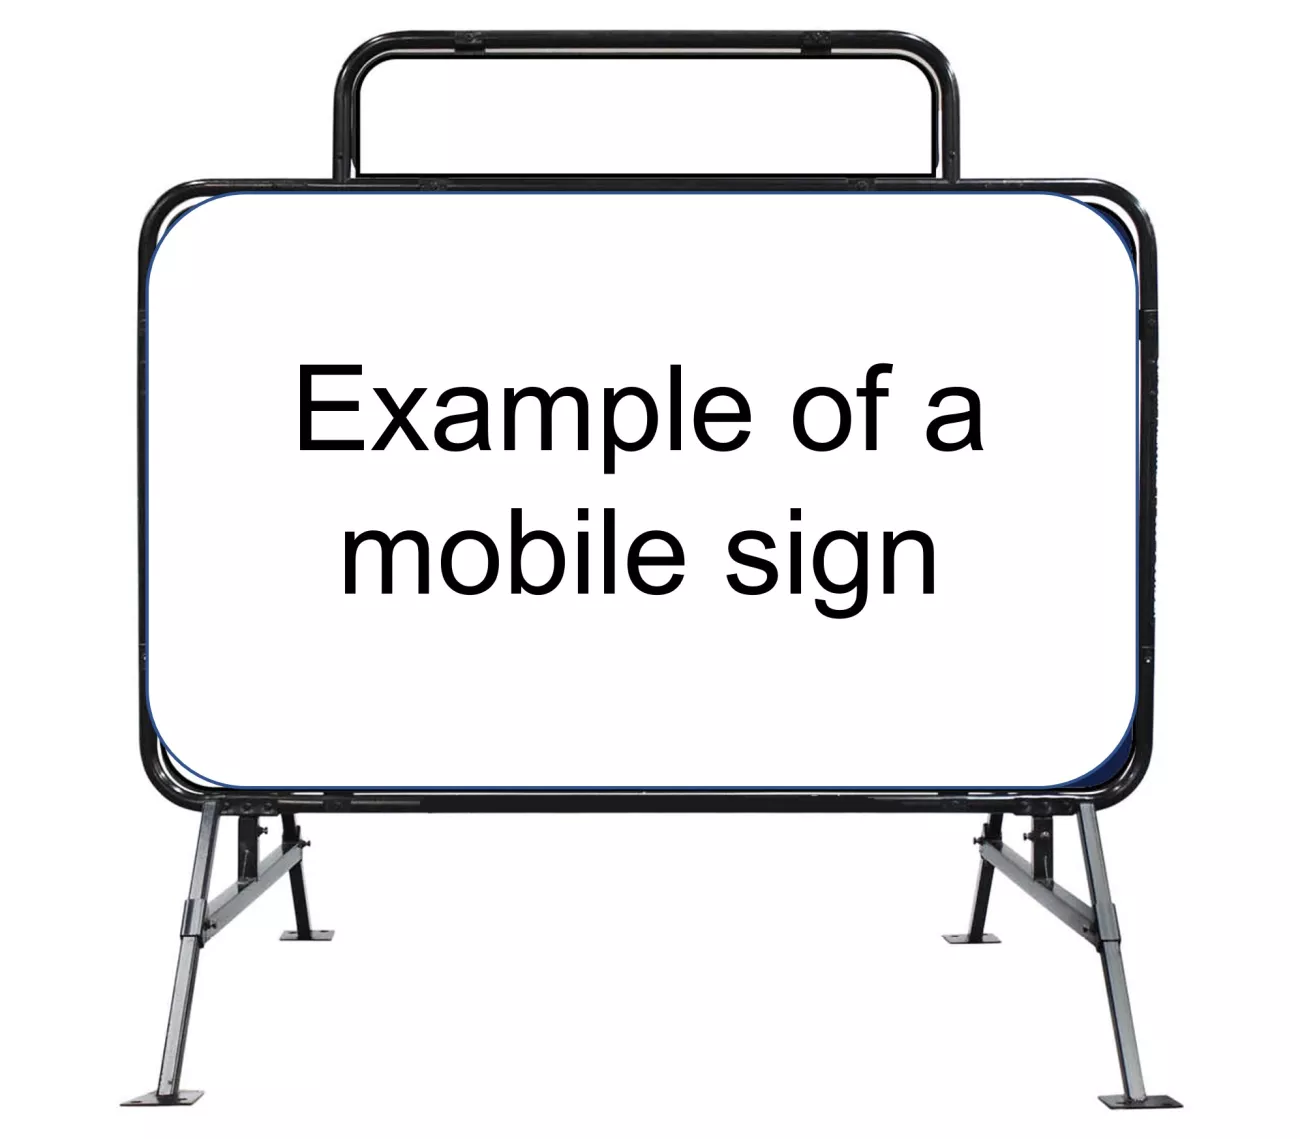 Mobile sign with the text "Example of a mobile sign"